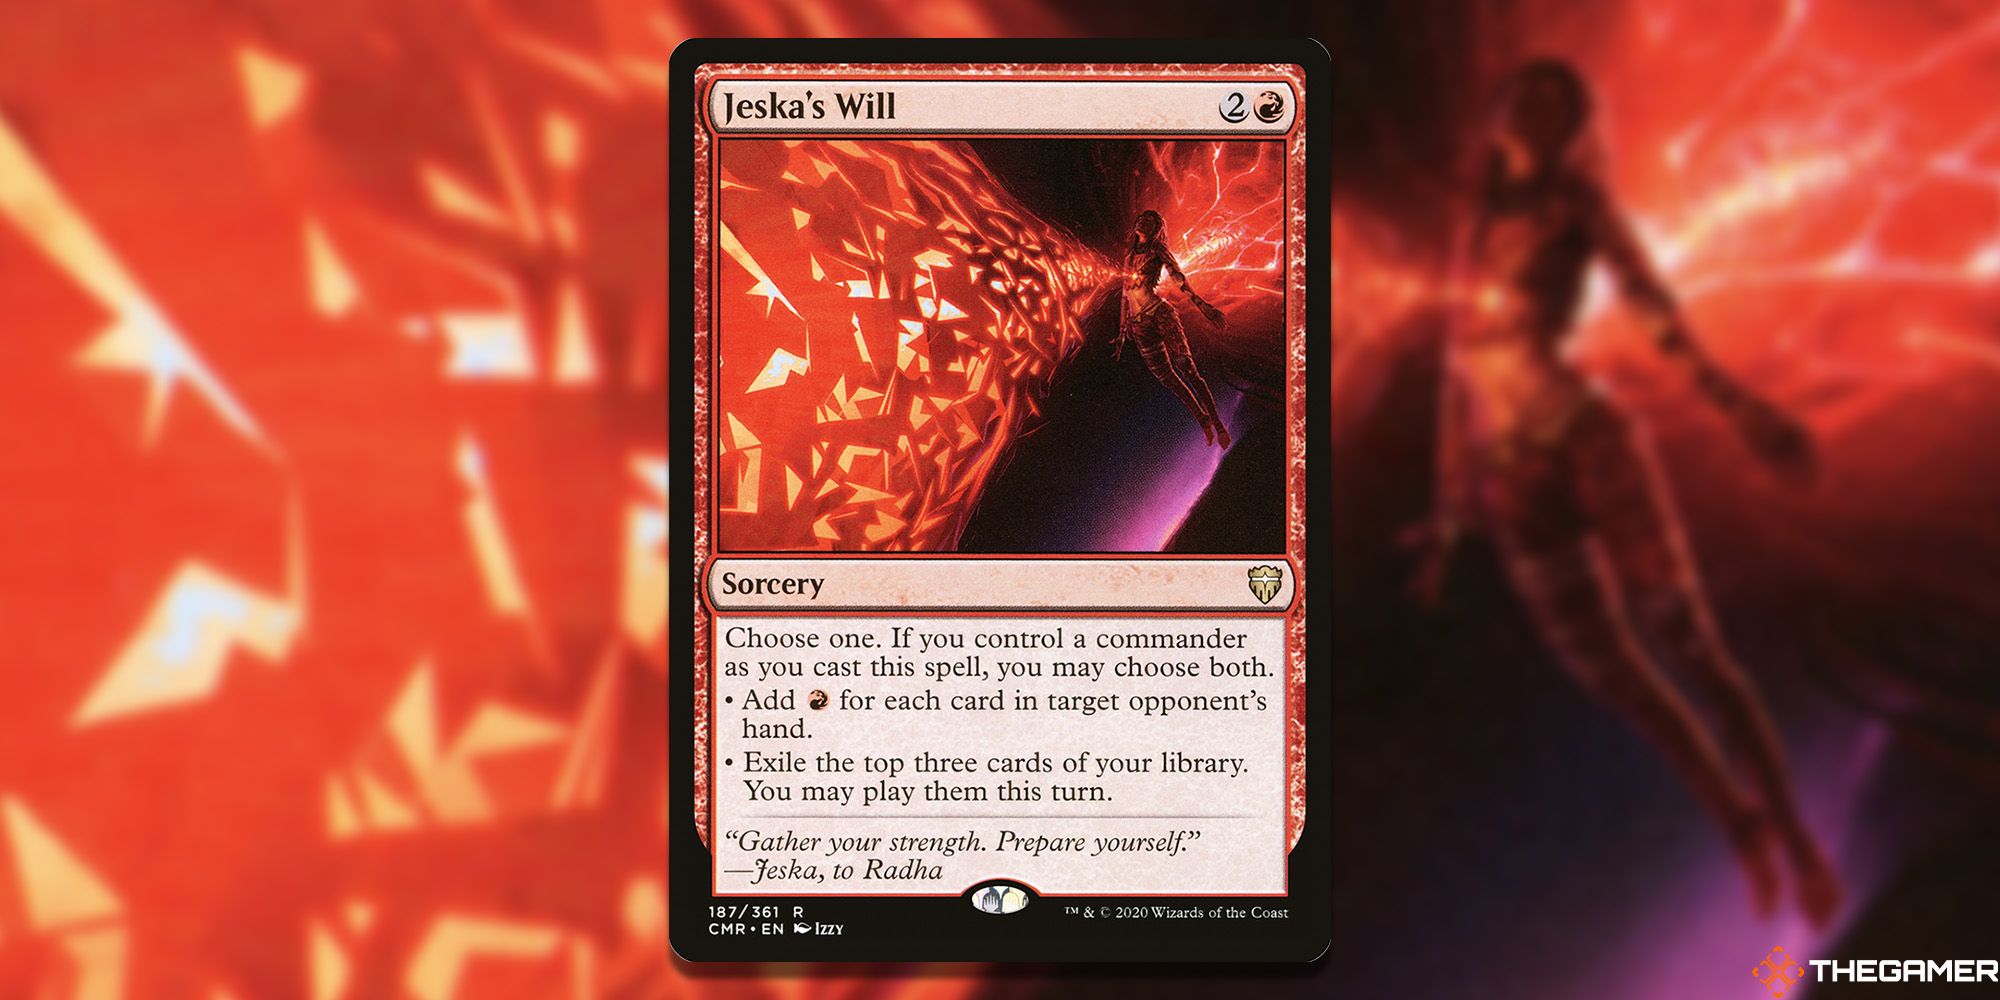 Image of the Jeska's Will card in Magic: The Gathering, with art by Izzy